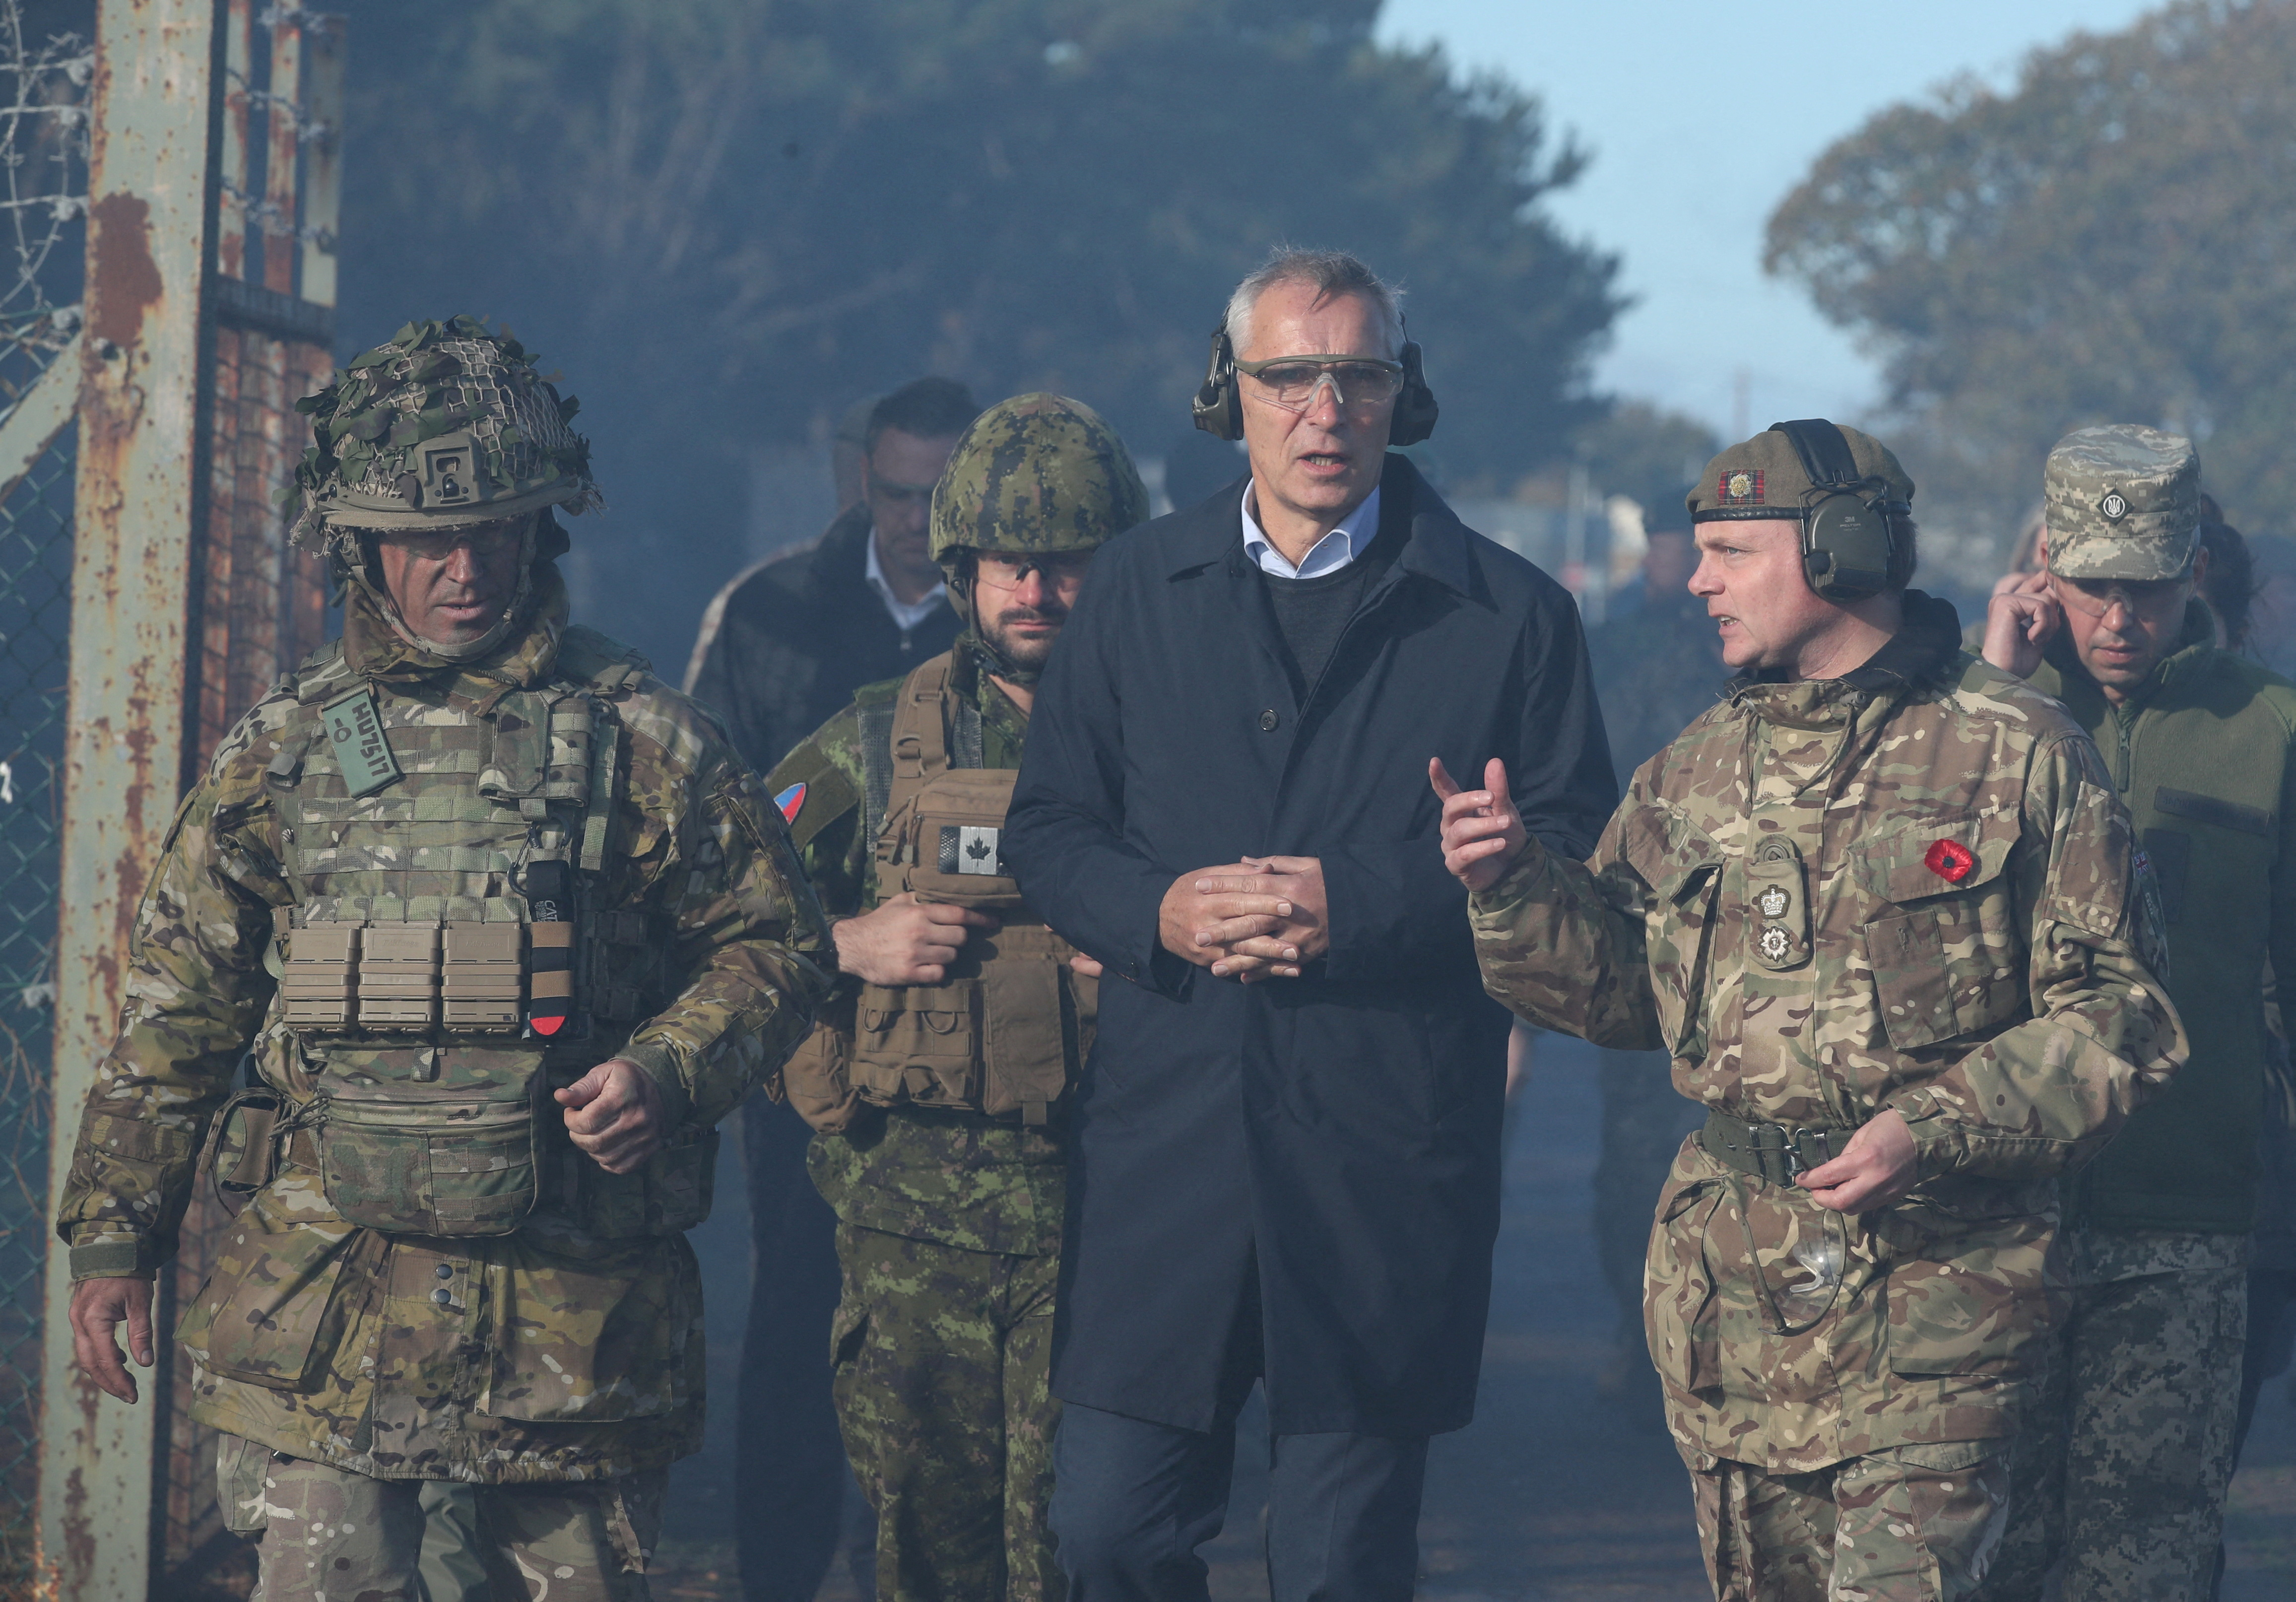 British defence minister hosts NATO chief at training camp for Ukrainian soldiers